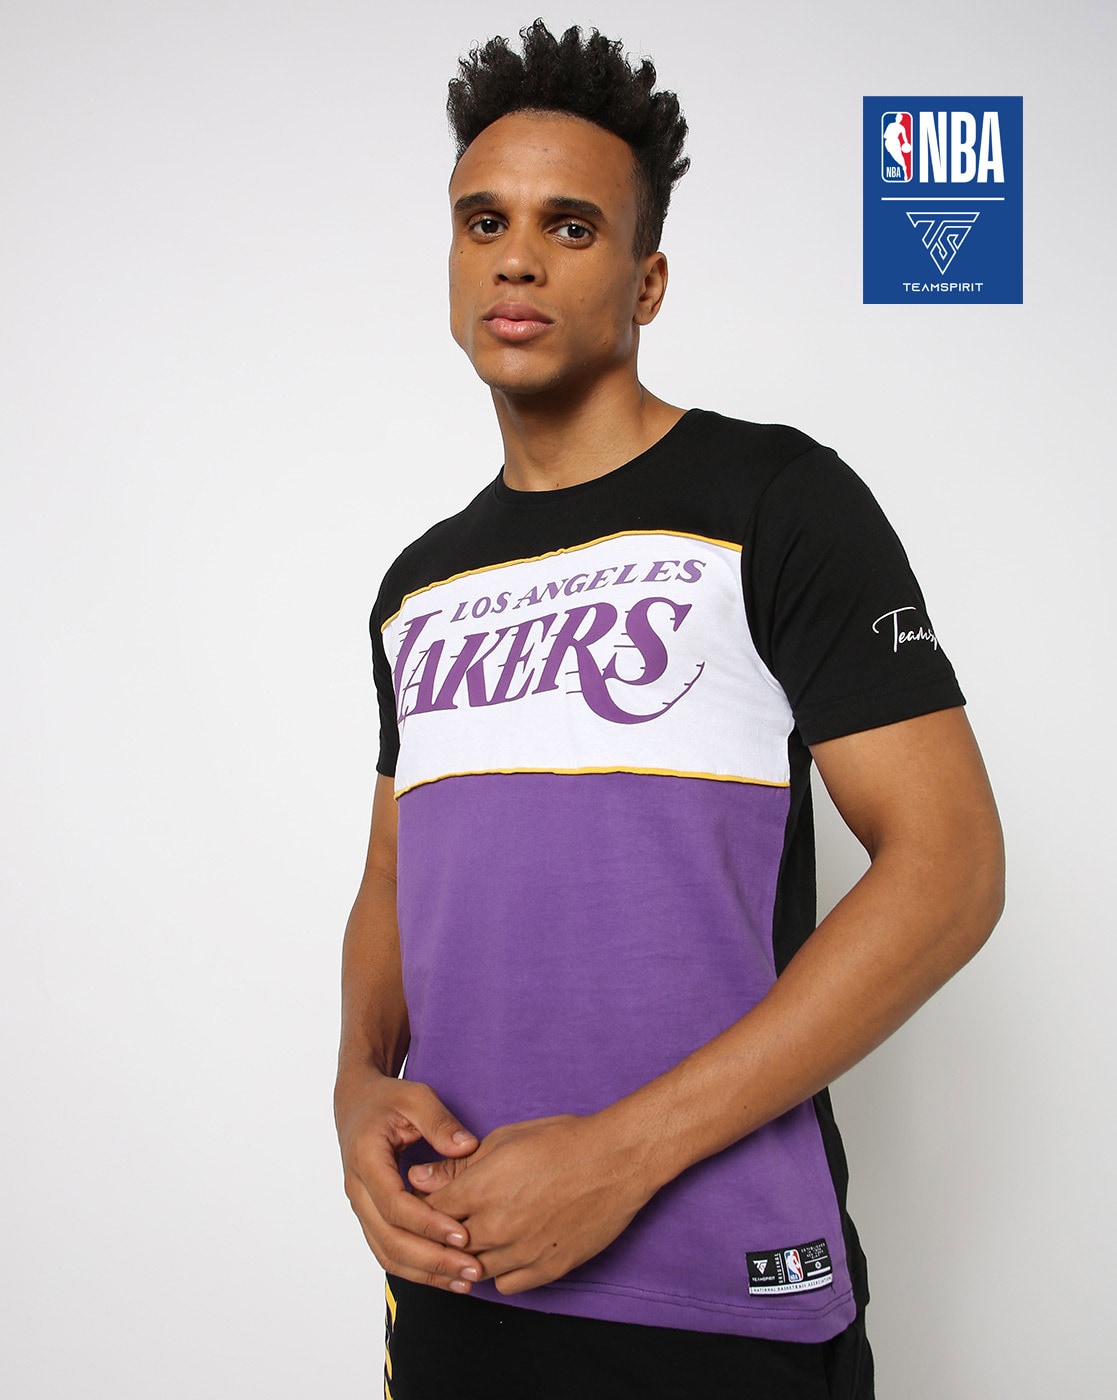 lakers t shirt online